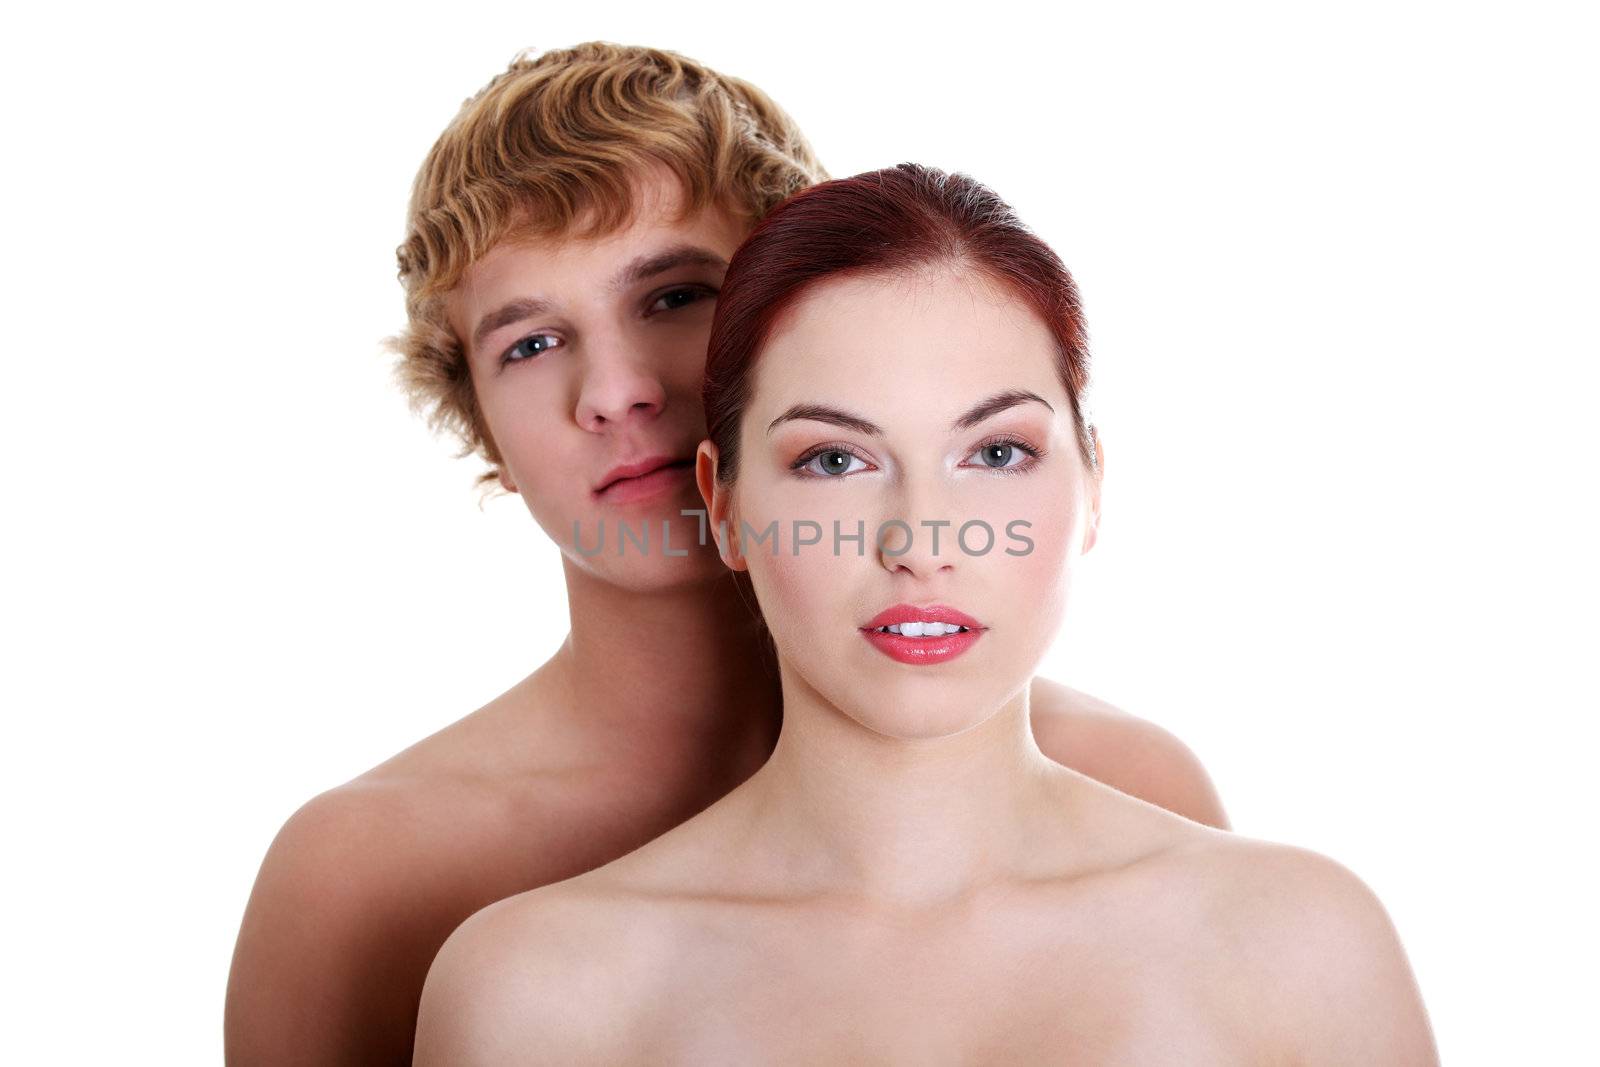 Topless couple standing against white background.